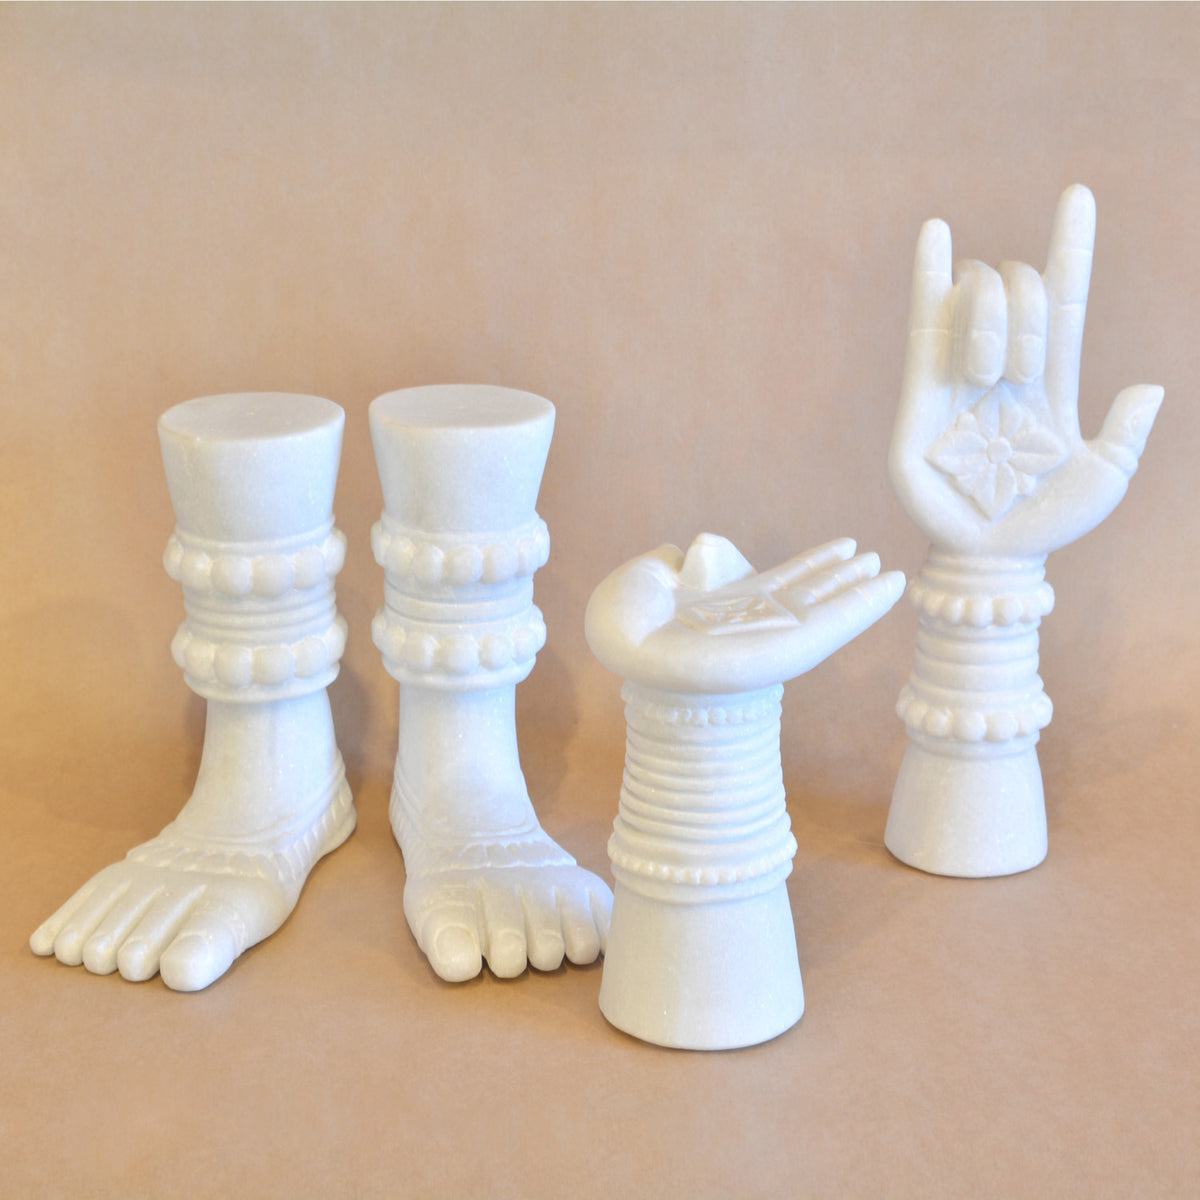 Buddhist Hands and Feet, White Marble image 1 of 7